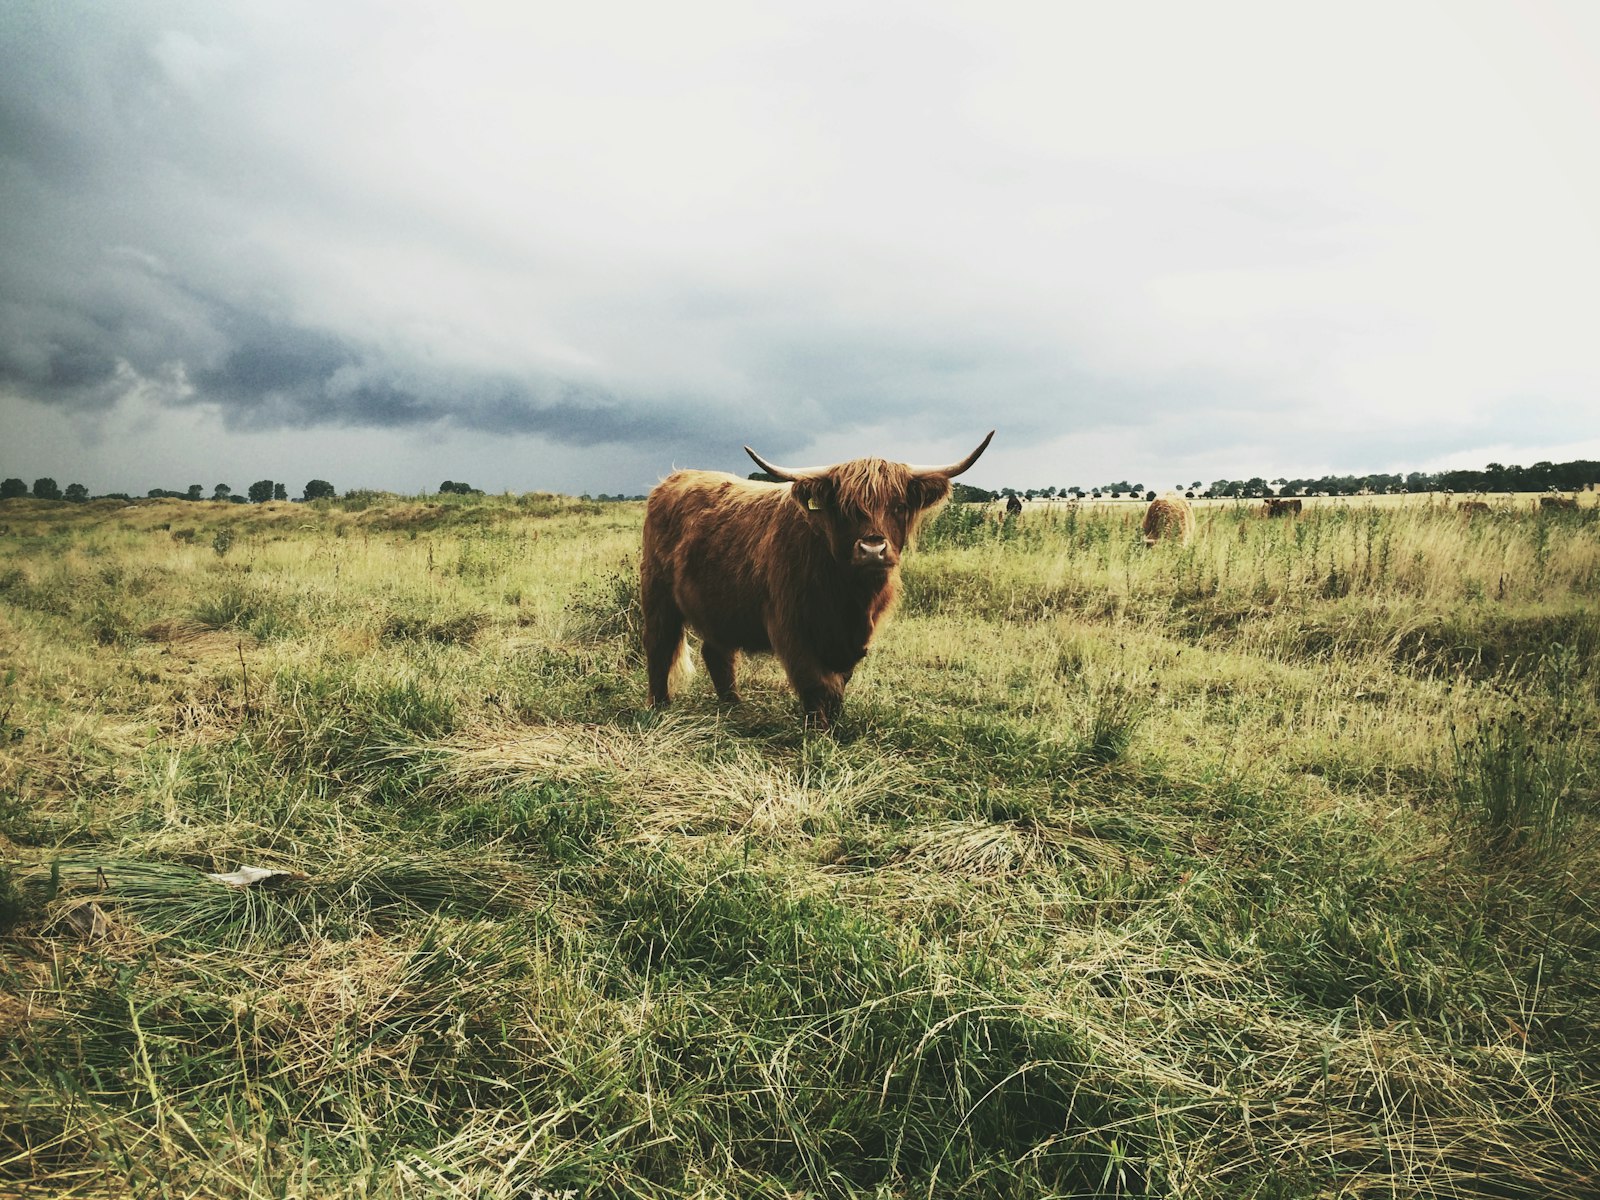 Apple iPhone + iPhone 5s back camera 4.15mm f/2.2 sample photo. Highland cattle standing on photography